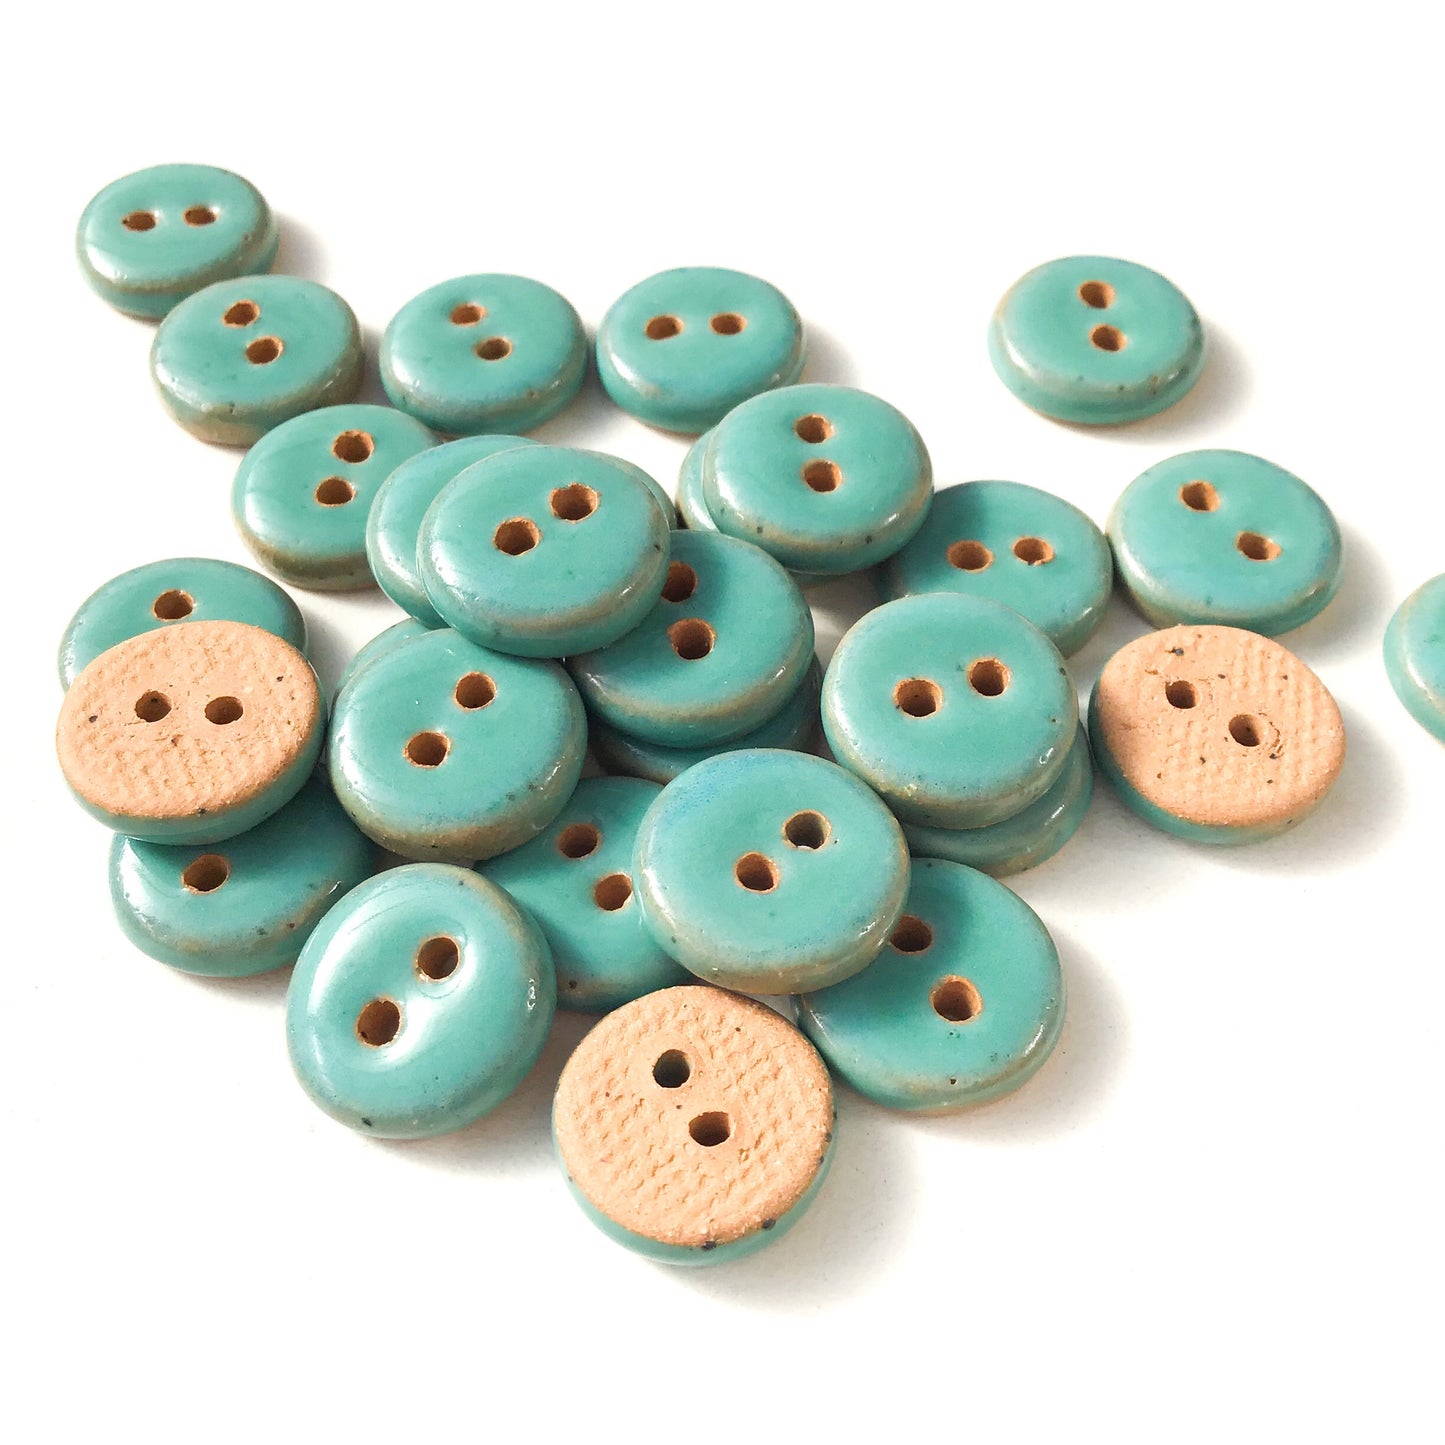 Turquoise Ceramic Buttons - Blue Green Pottery Buttons - 9/16" (ws-253)